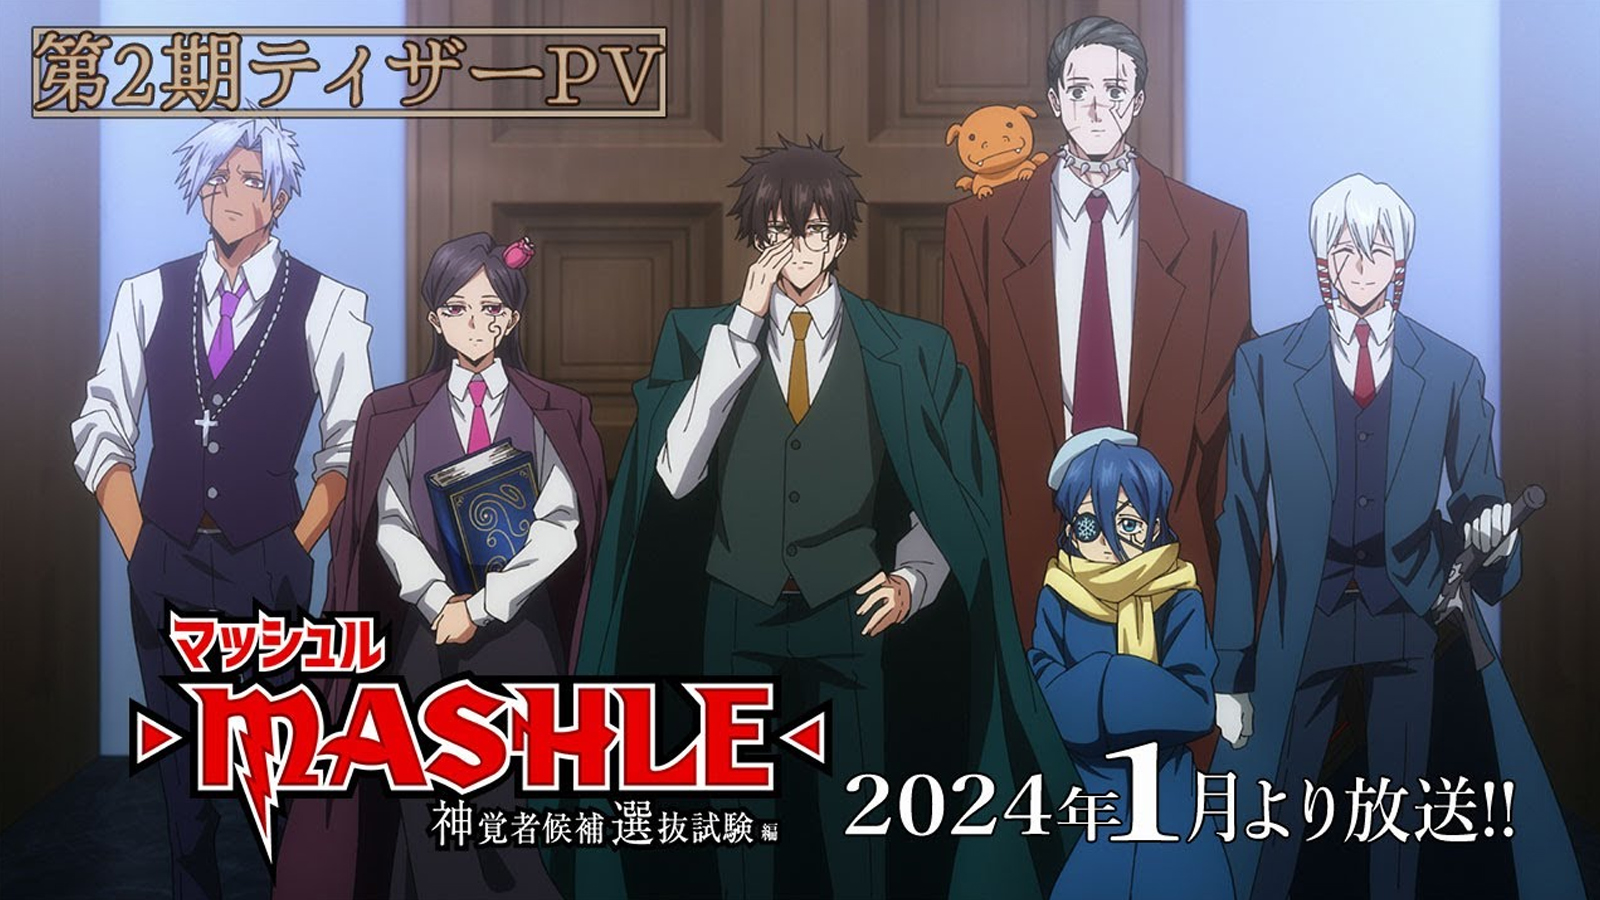 Mashle season 2 release date, OP, new characters announced